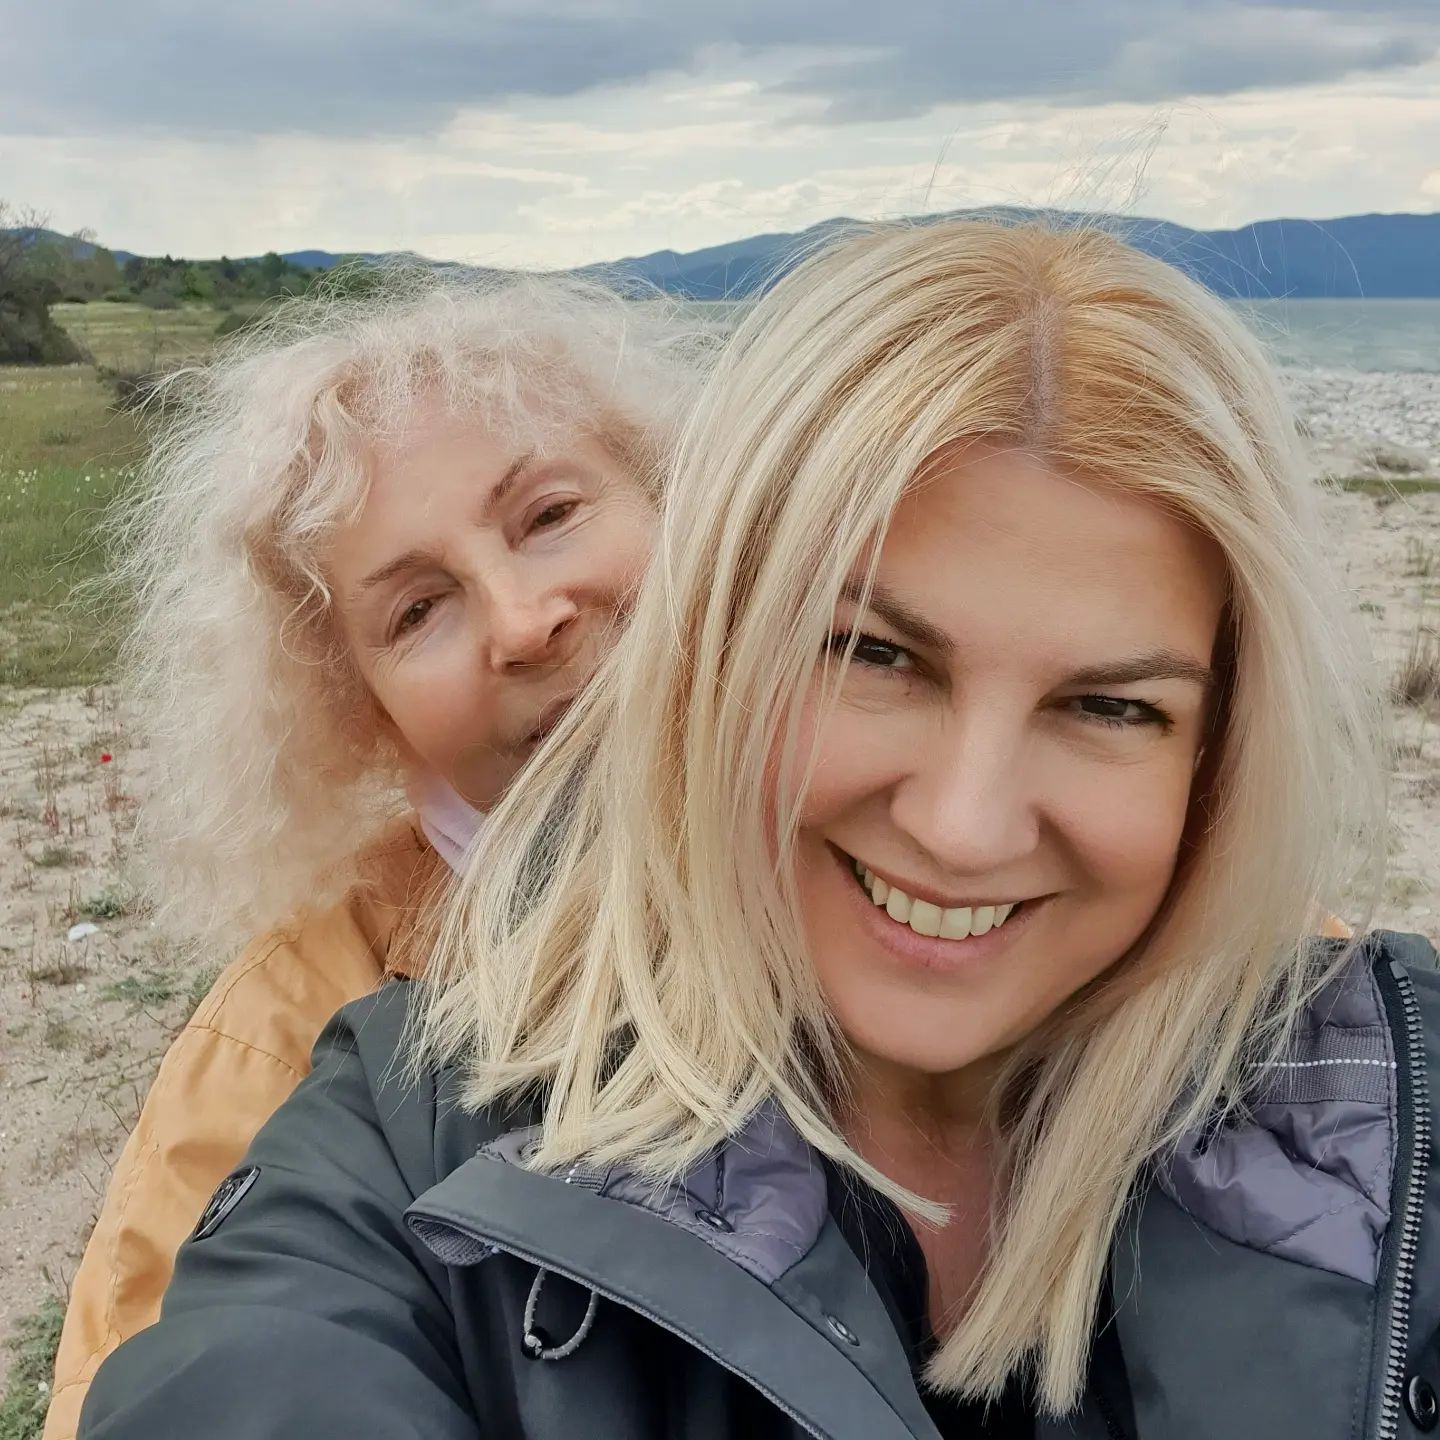 Photo by raniathraskia in Θεσσαλονίκη Thessaloniki Greece. May be a selfie of 1 person blonde hair and lake